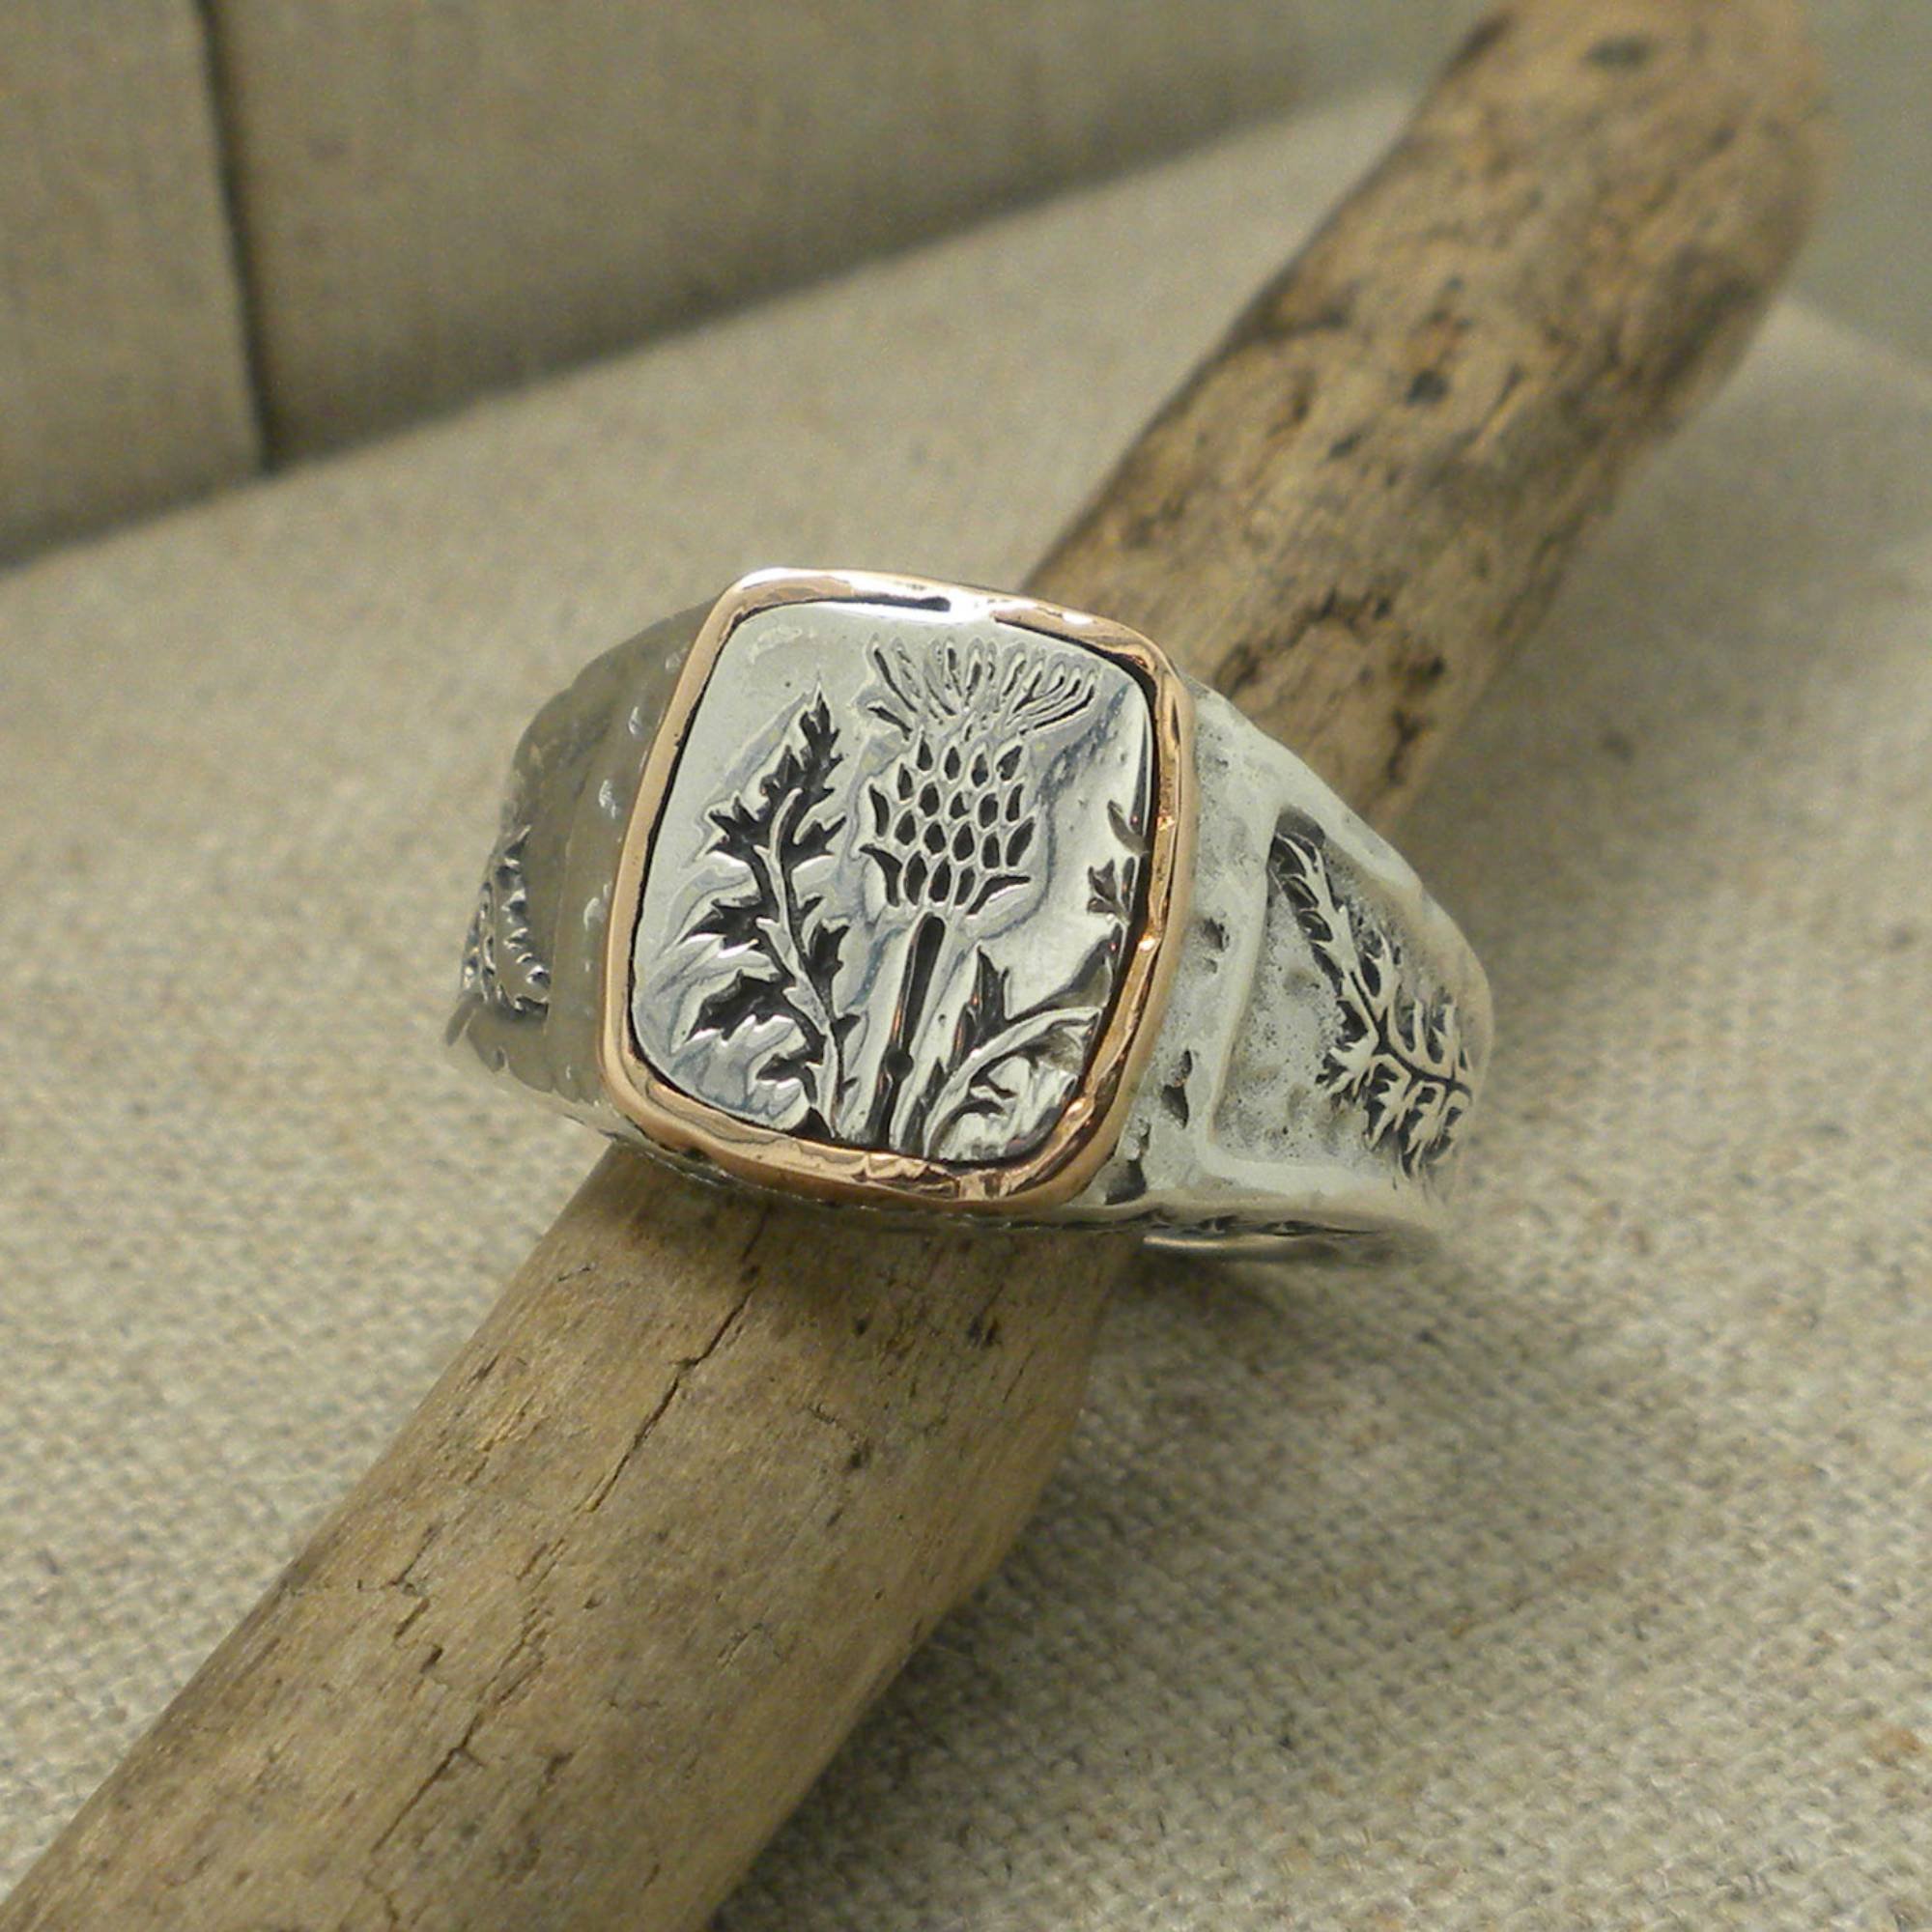 Petrichor Signet Ring with Thistle